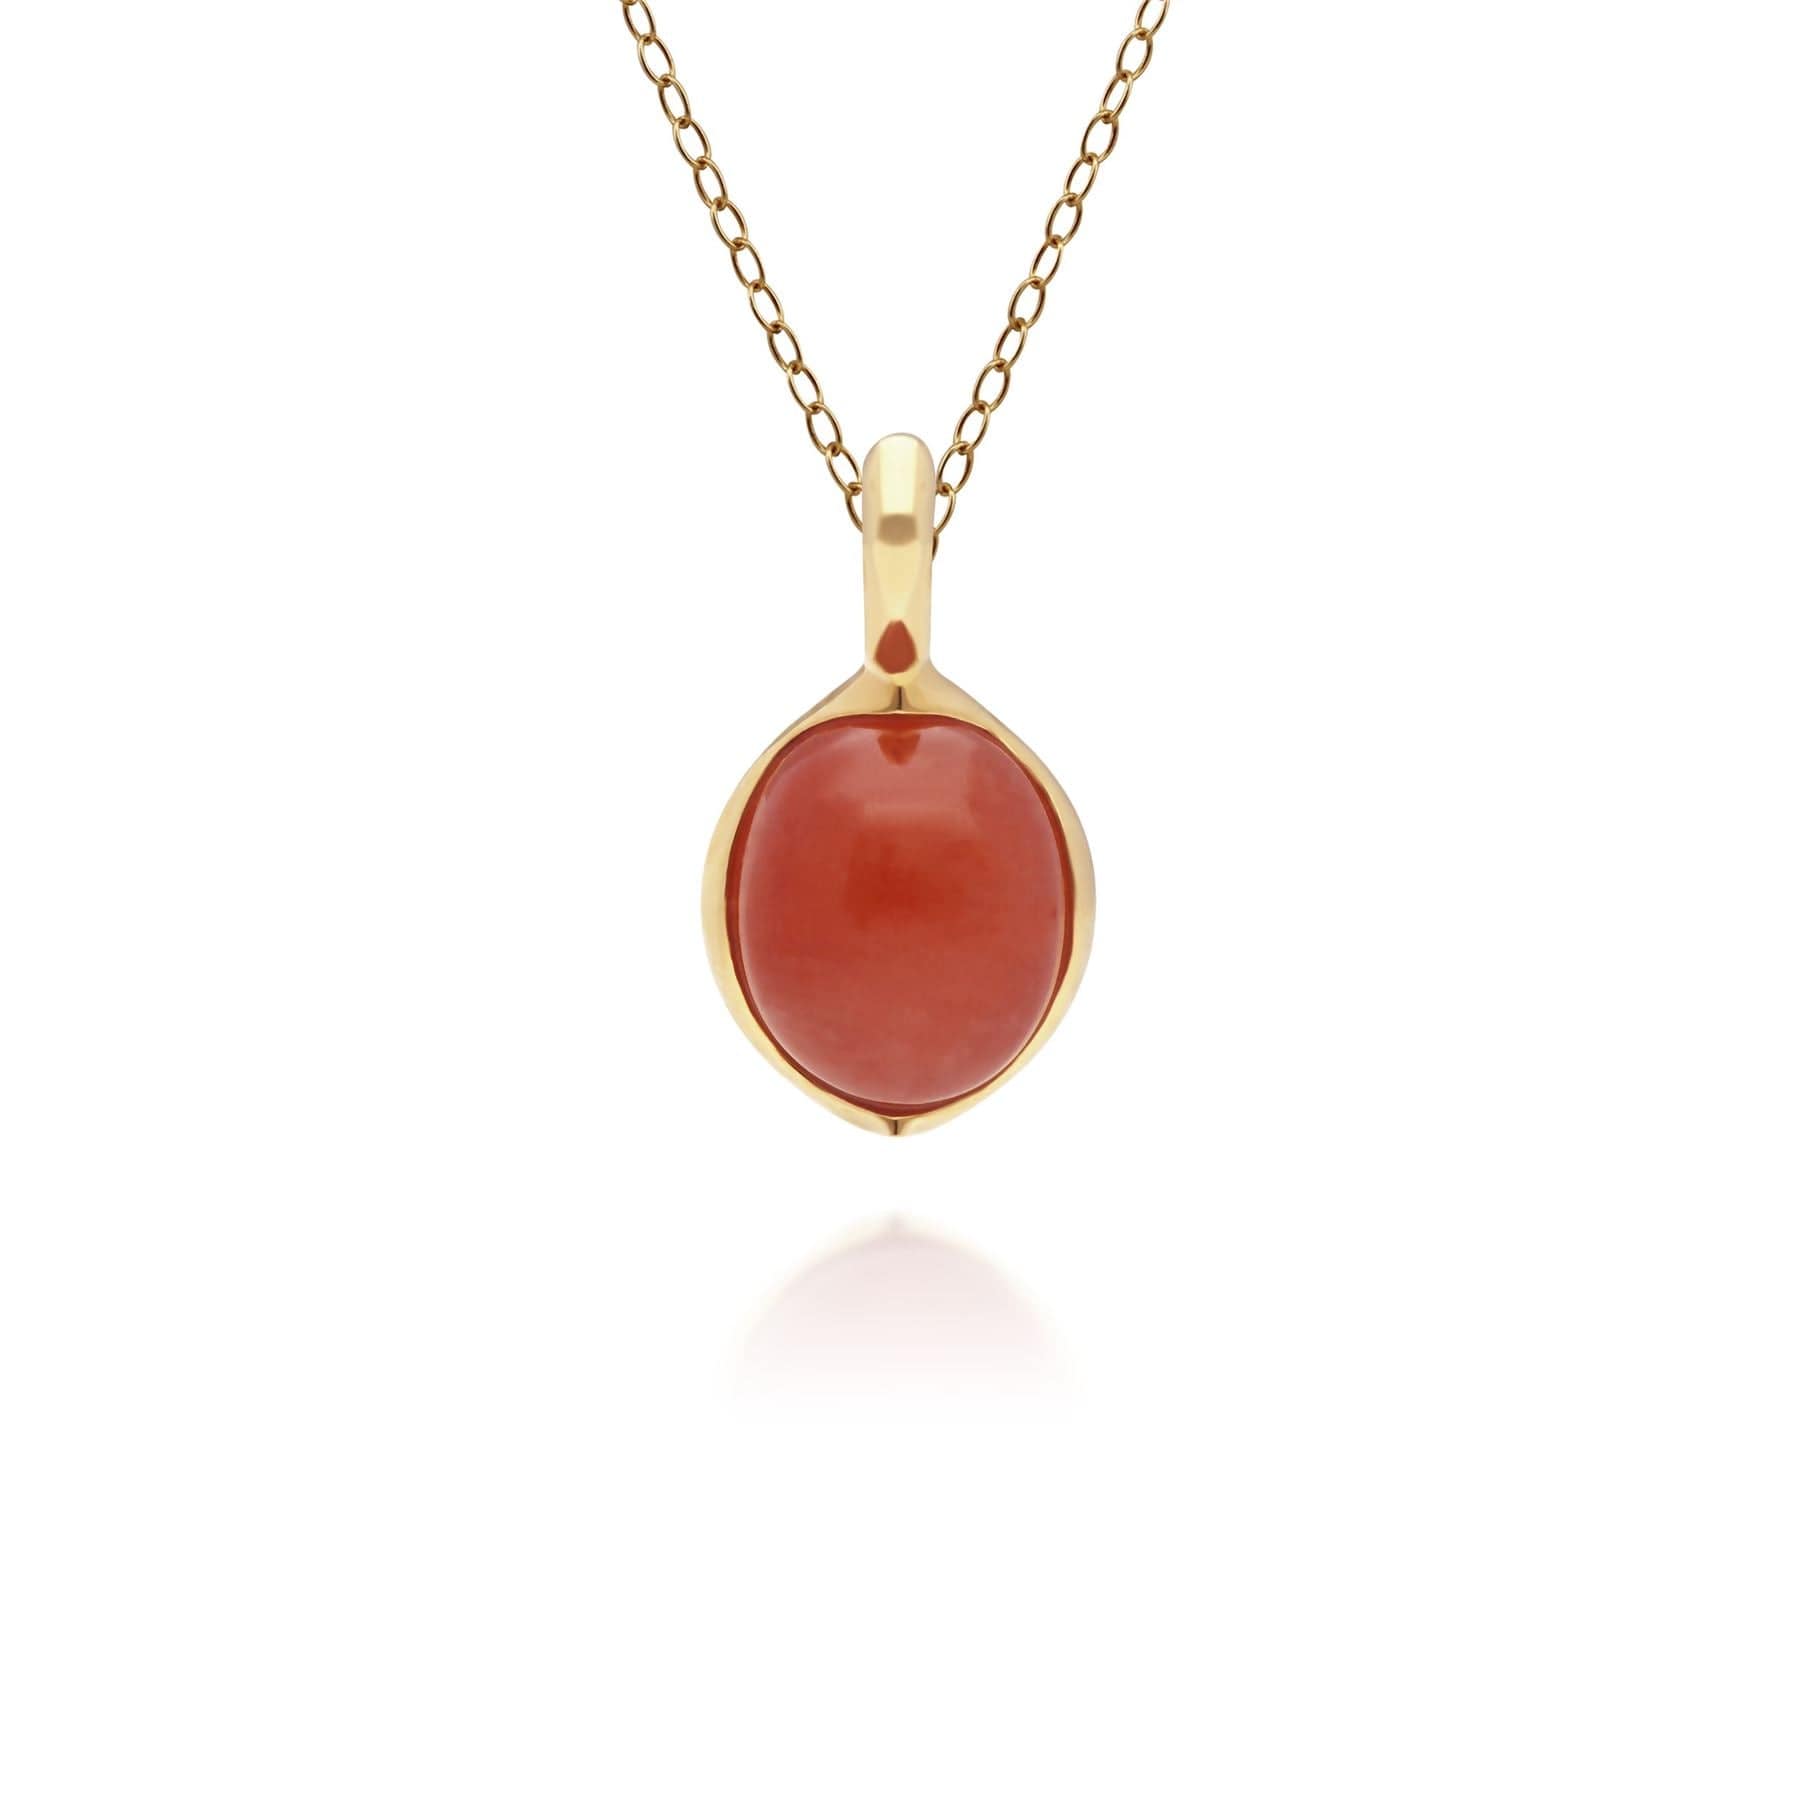 Photos - Pendant / Choker Necklace Irregular Collection Dyed Red Jade Pendant in Gold Plated Sterling Silver